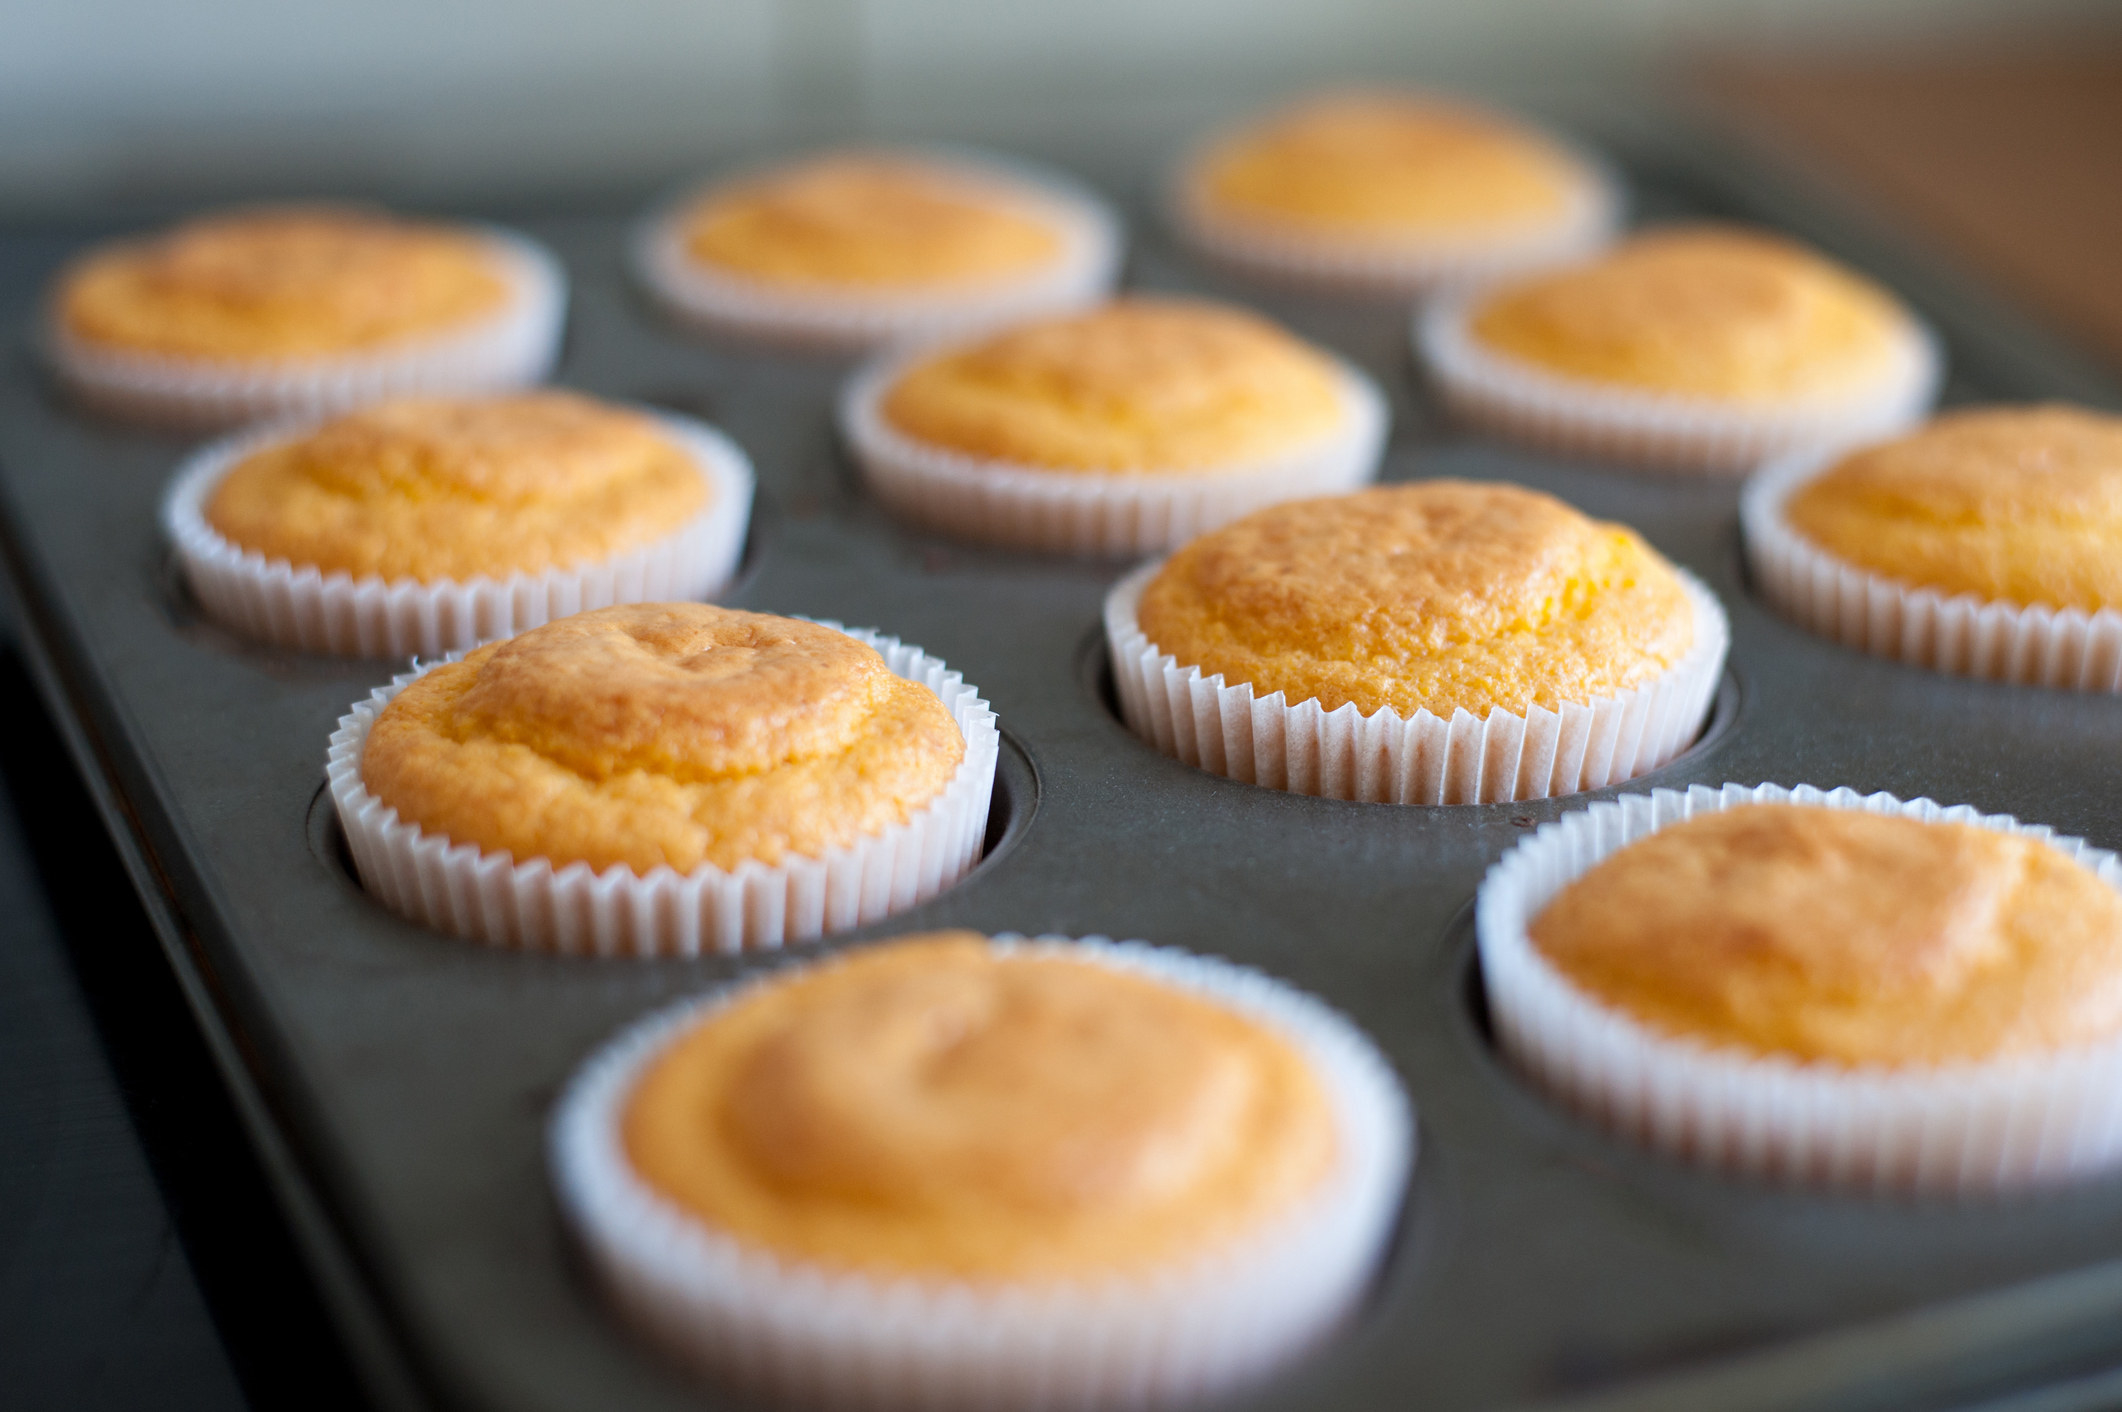 Freshly baked corn muffins in molds.